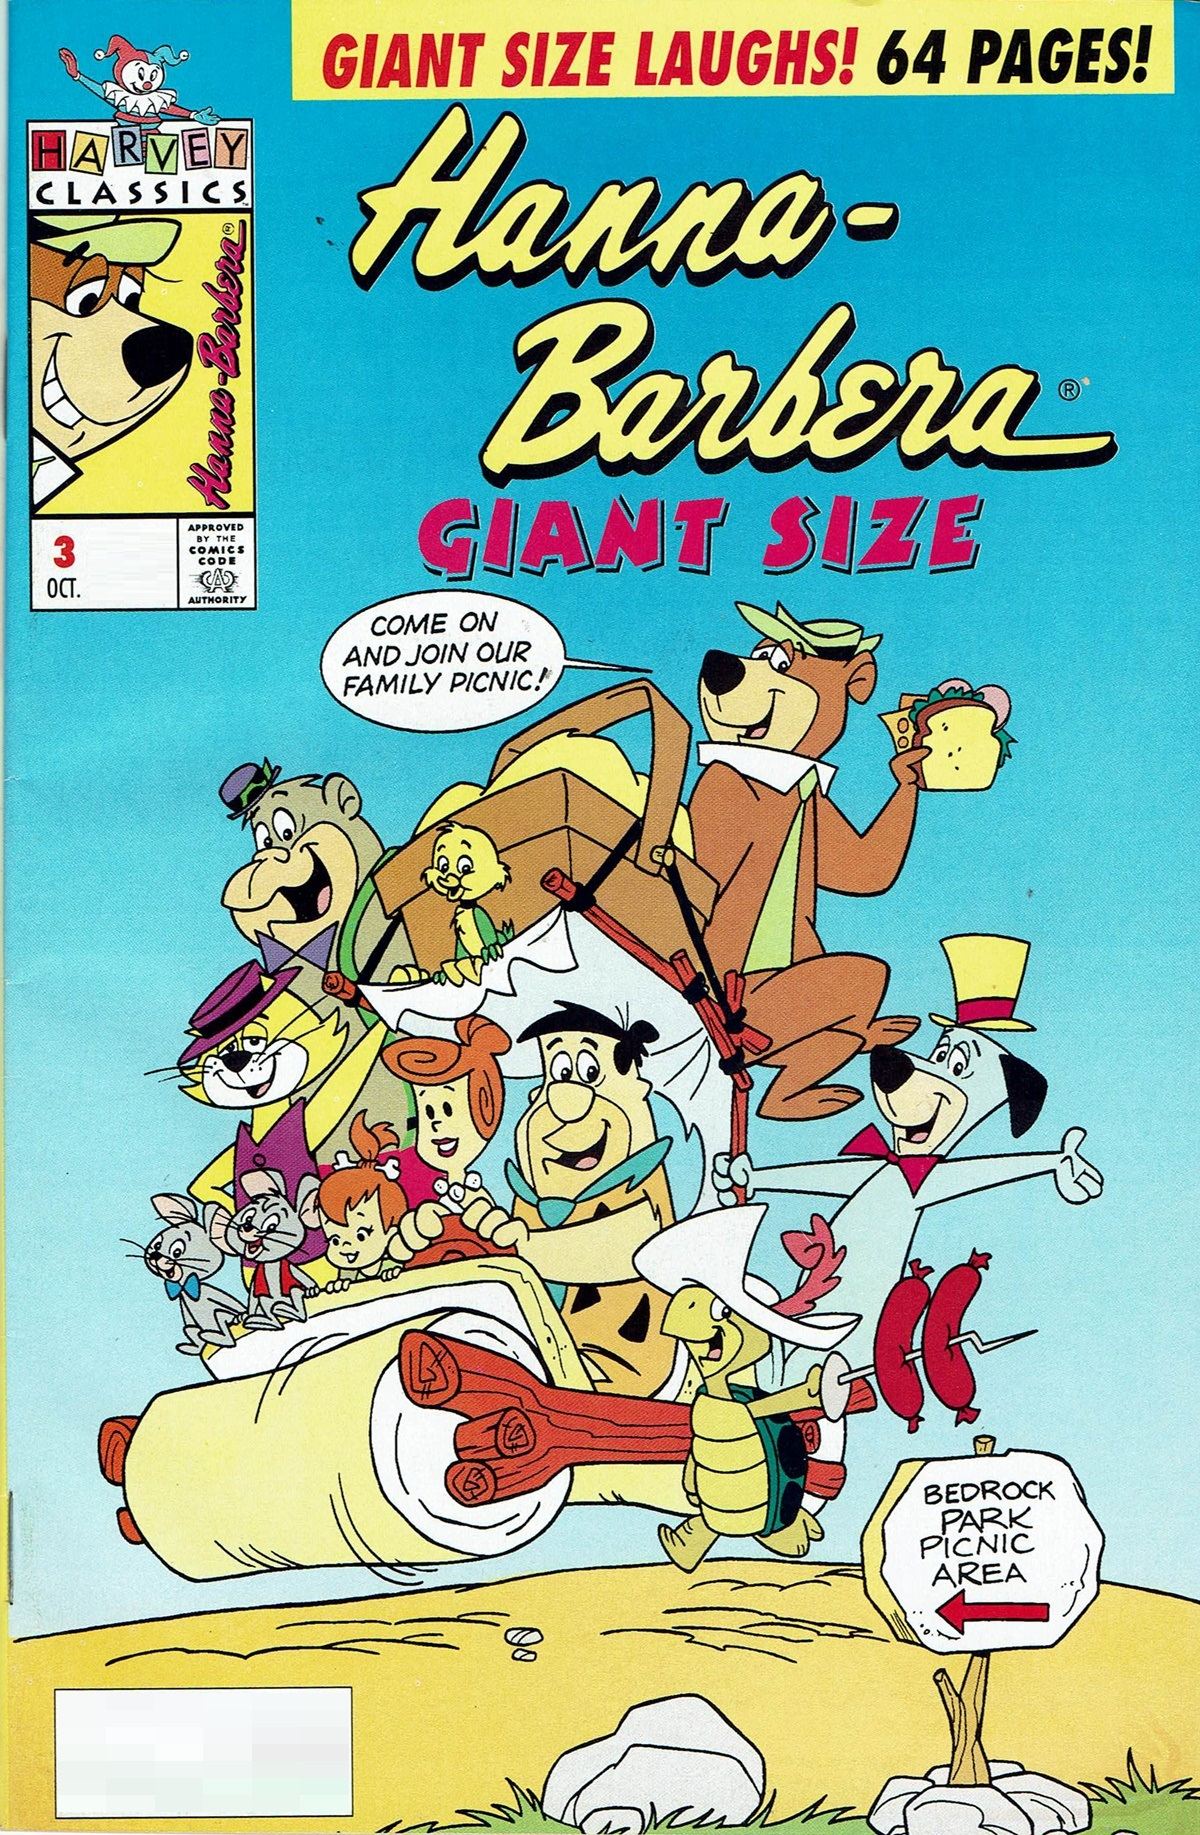 Read online Hanna Barbera Giant Size comic -  Issue #3 - 1